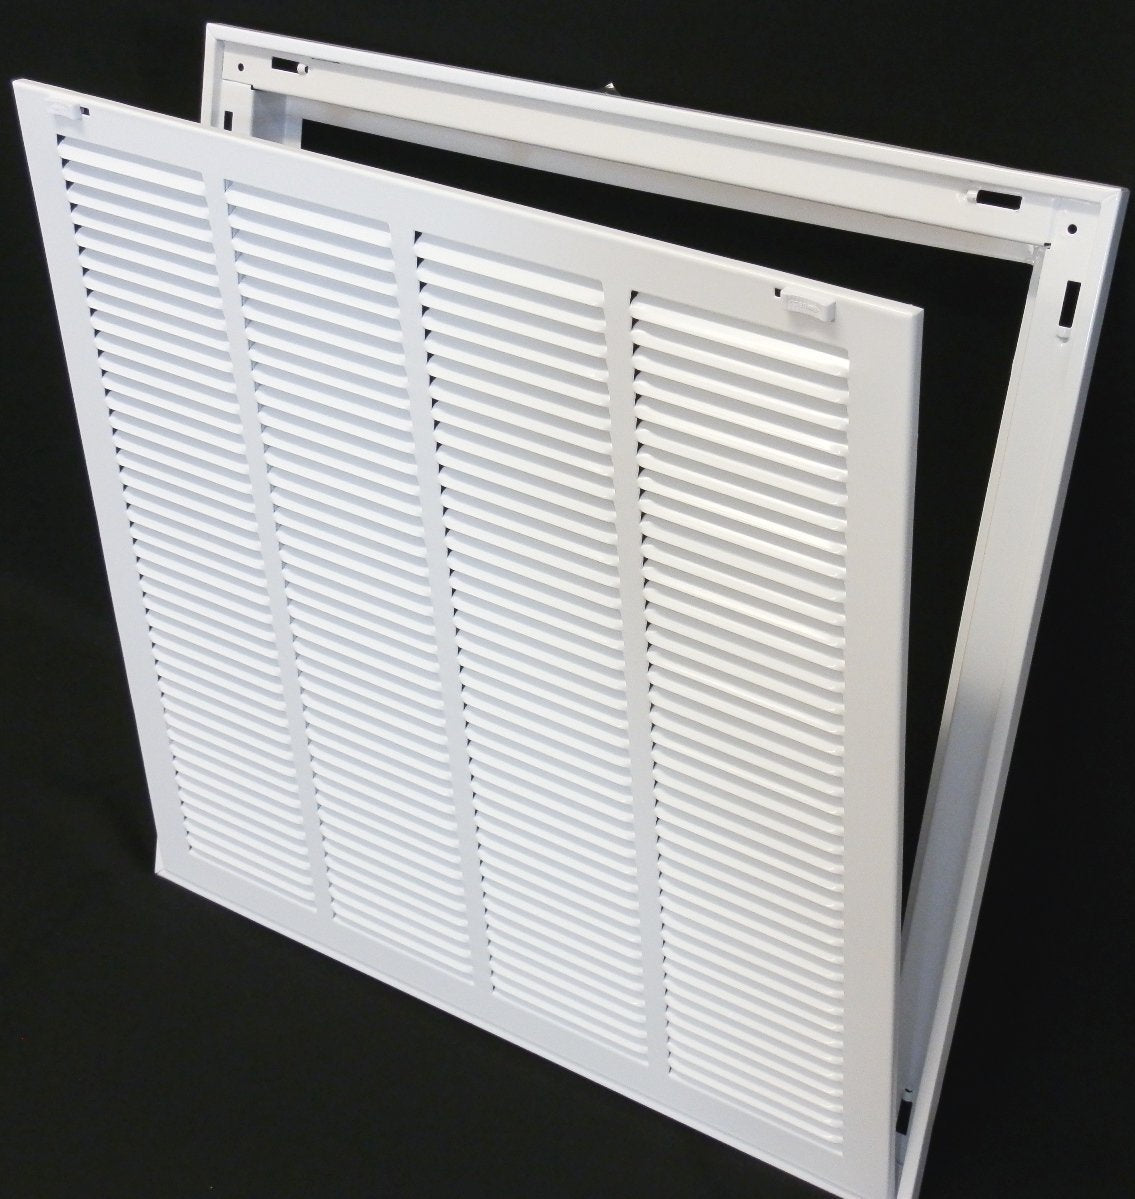 25&quot; X 26&quot; Steel Return Air Filter Grille for 1&quot; Filter - Removable Frame - [Outer Dimensions: 27 5/8&quot; X 28 5/8&quot;]